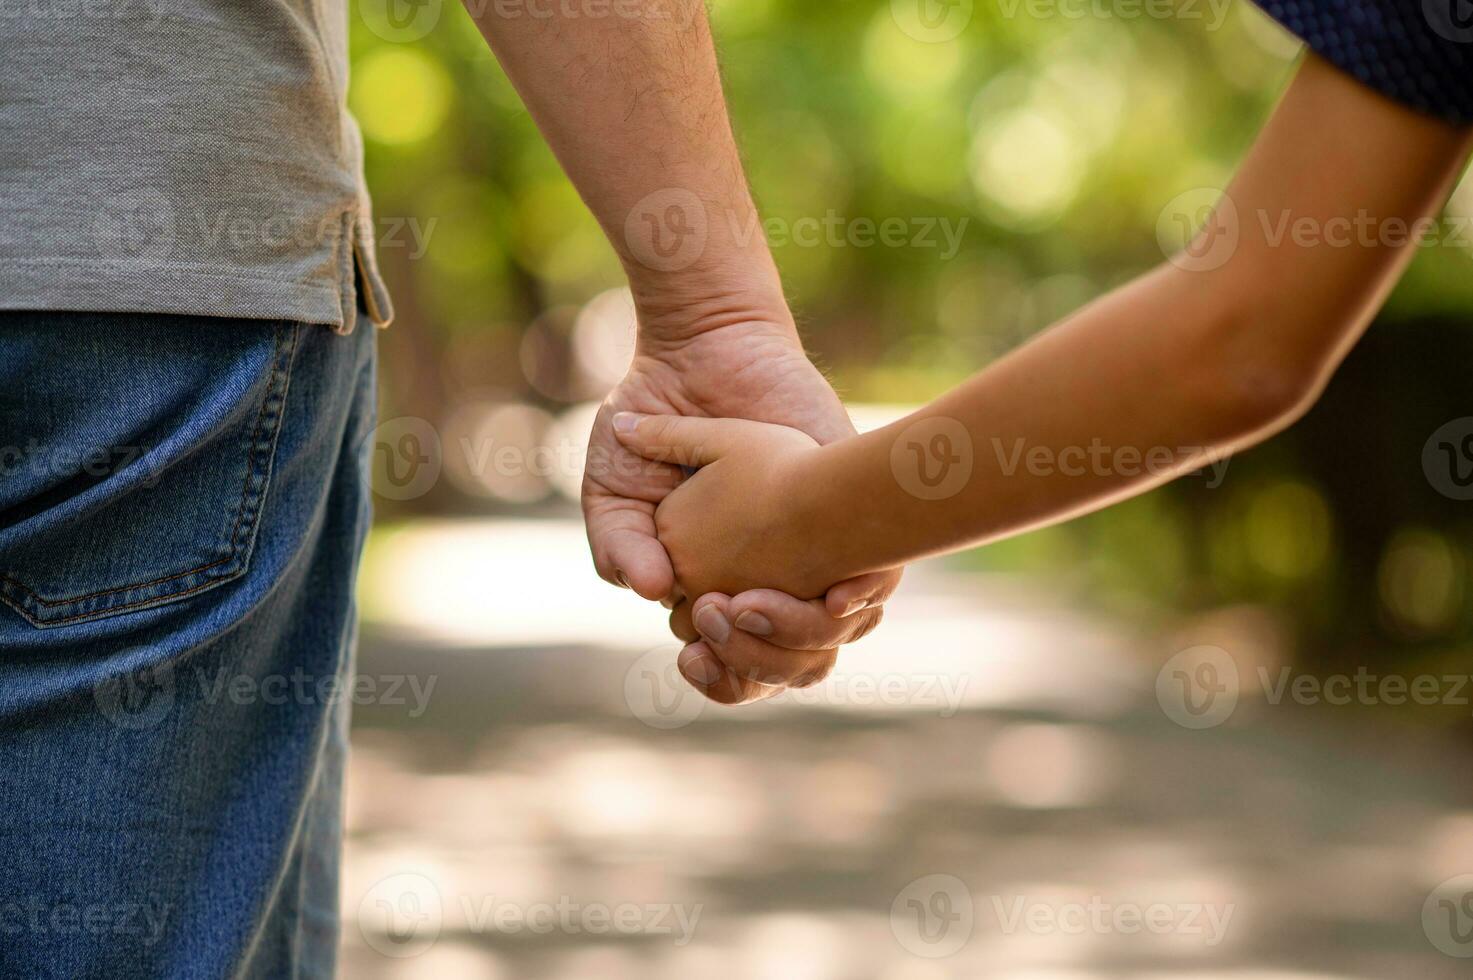 the father's hand held tightly the hand of his little son against the background of green foliage, close-up photo